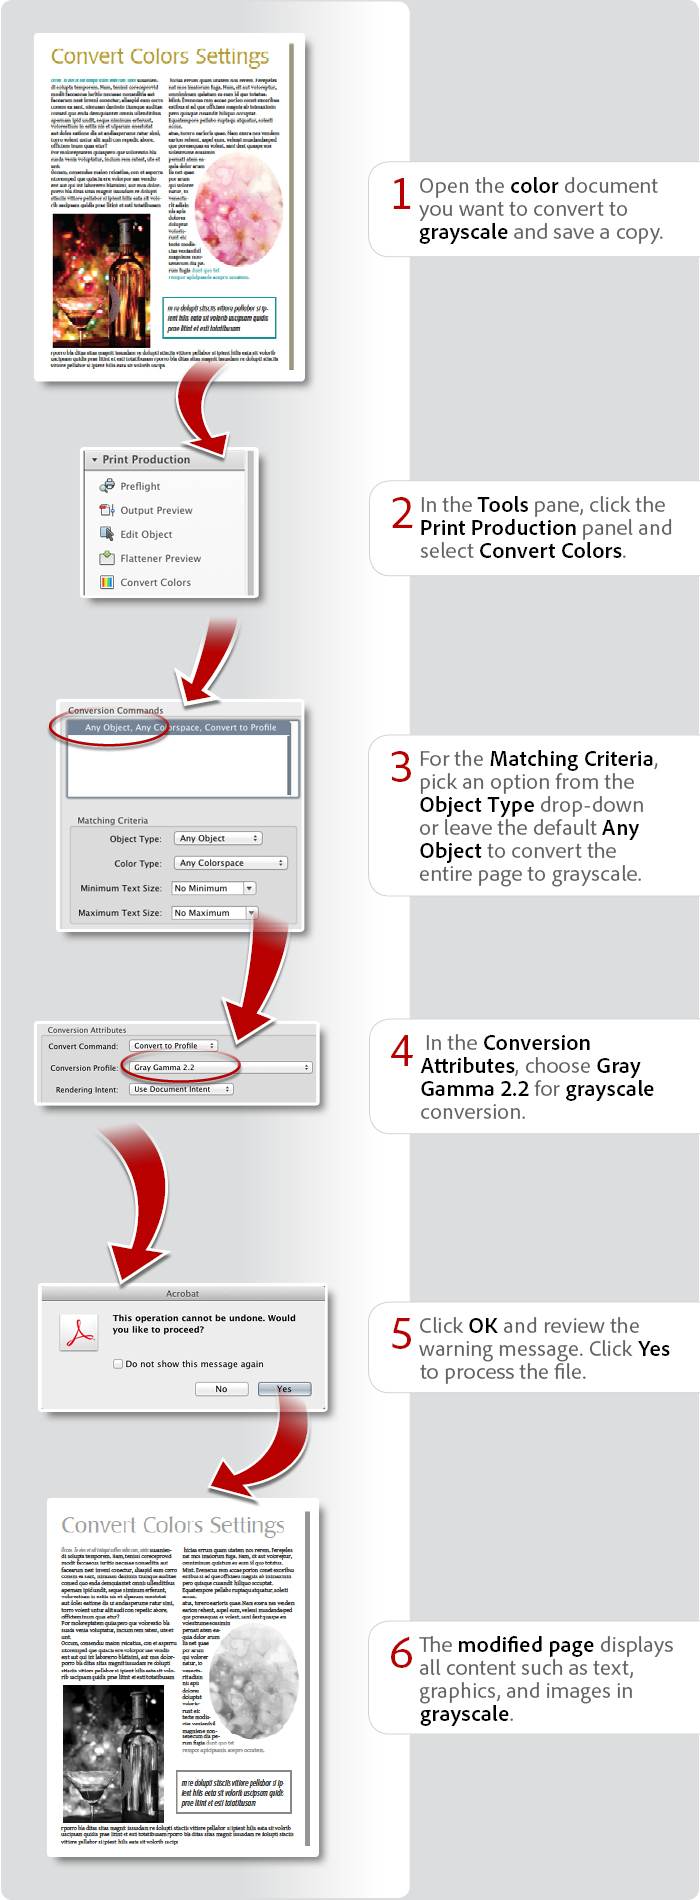 How to convert PDF files to grayscale using Acrobat XI Pro